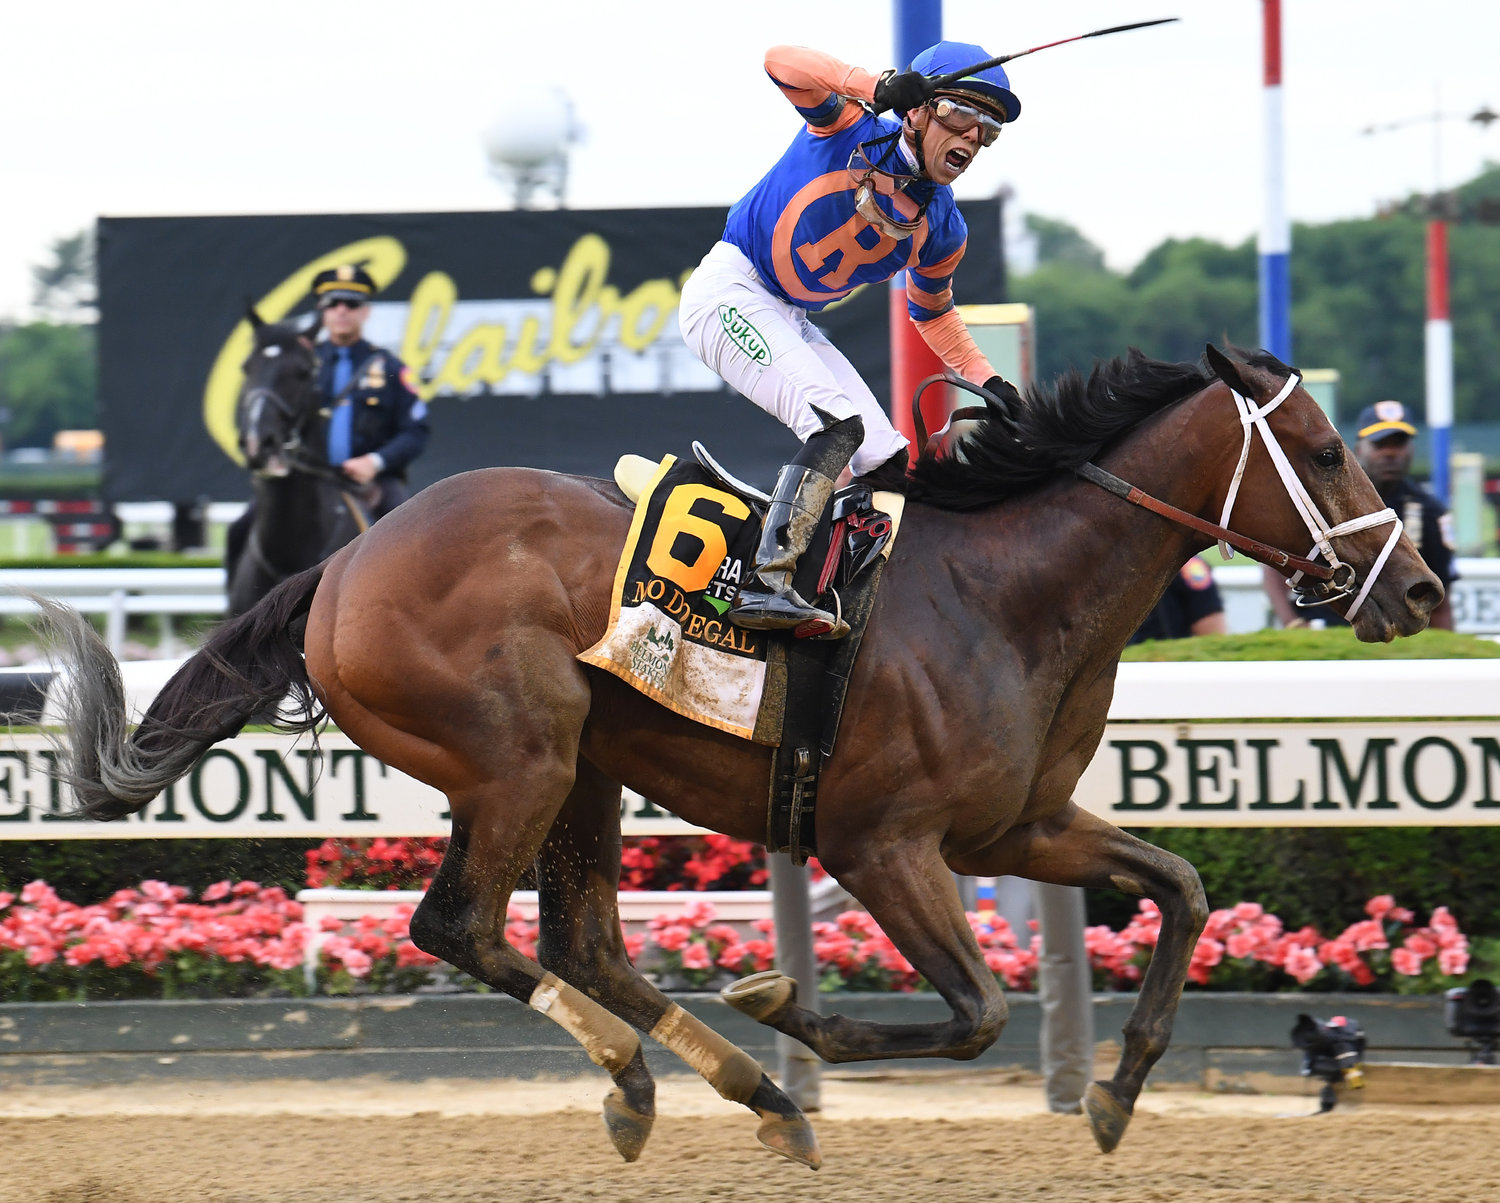 Favorite Mo Donegal, with jockey Irad Ortiz Jr. aboard, won the 154th running of the Belmont Stakes before a crowd of 46,301.